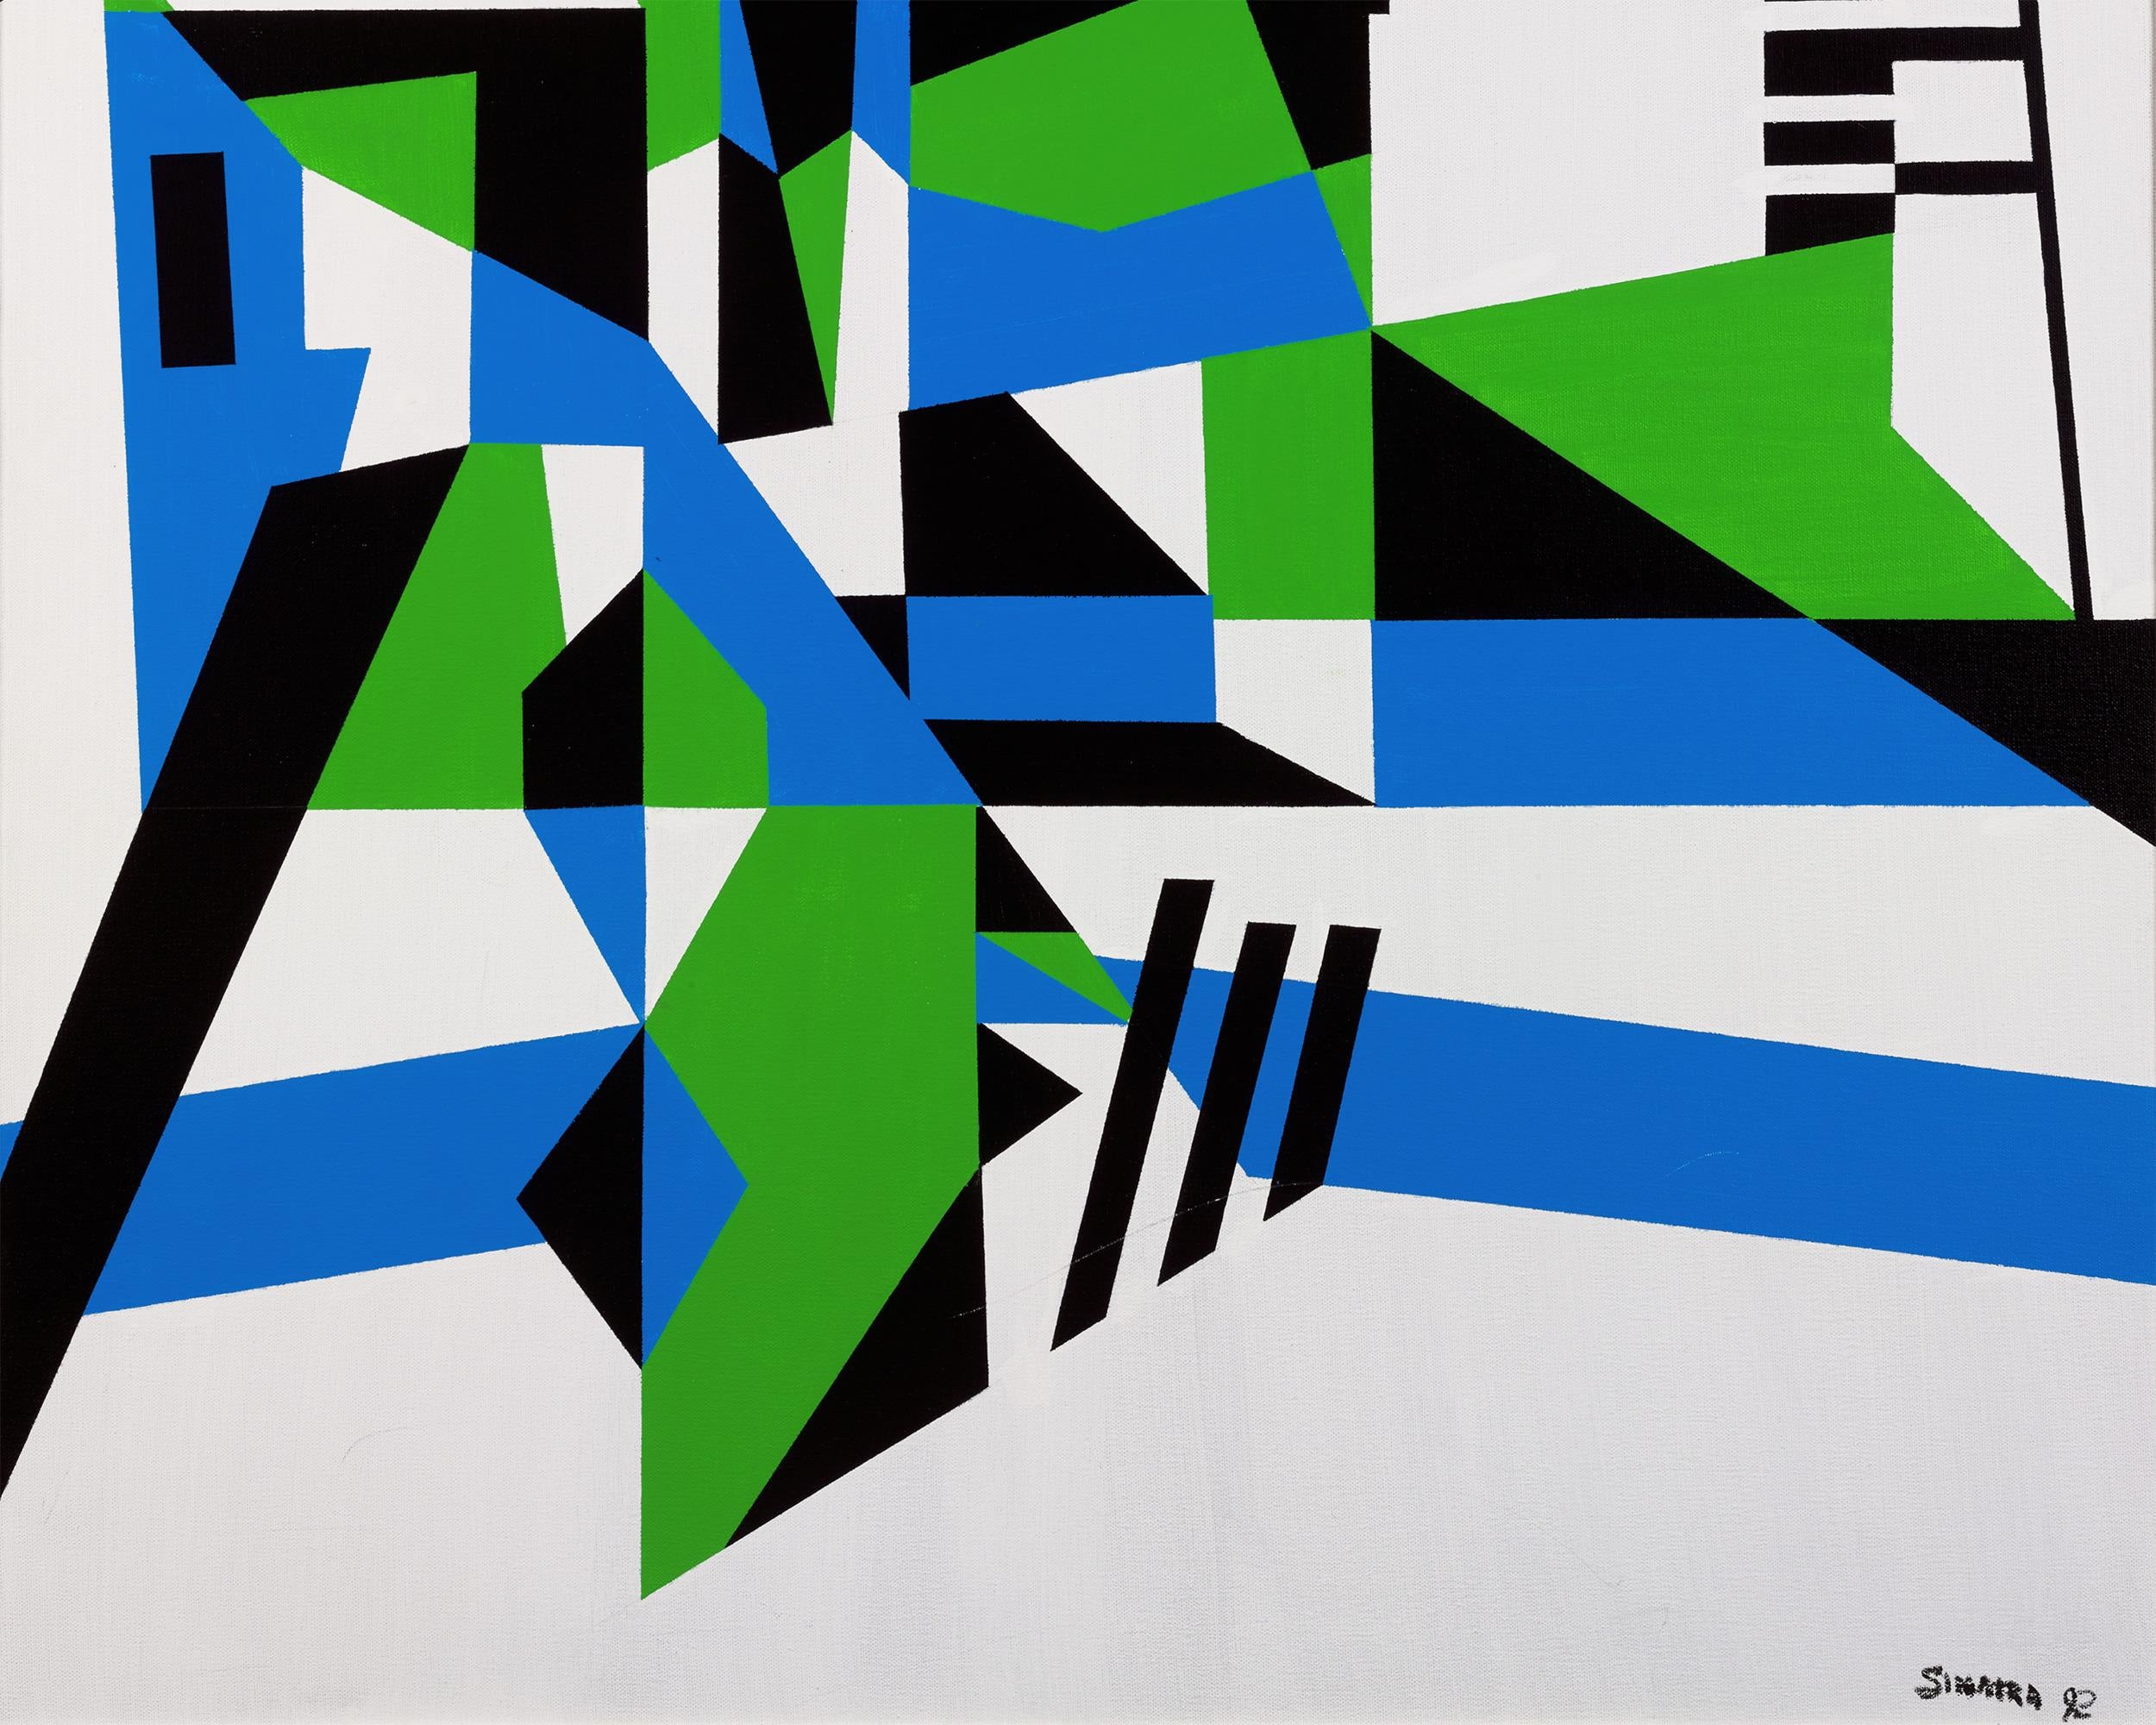 Shapes in Green, Blue, and Black by Frank Sinatra 2